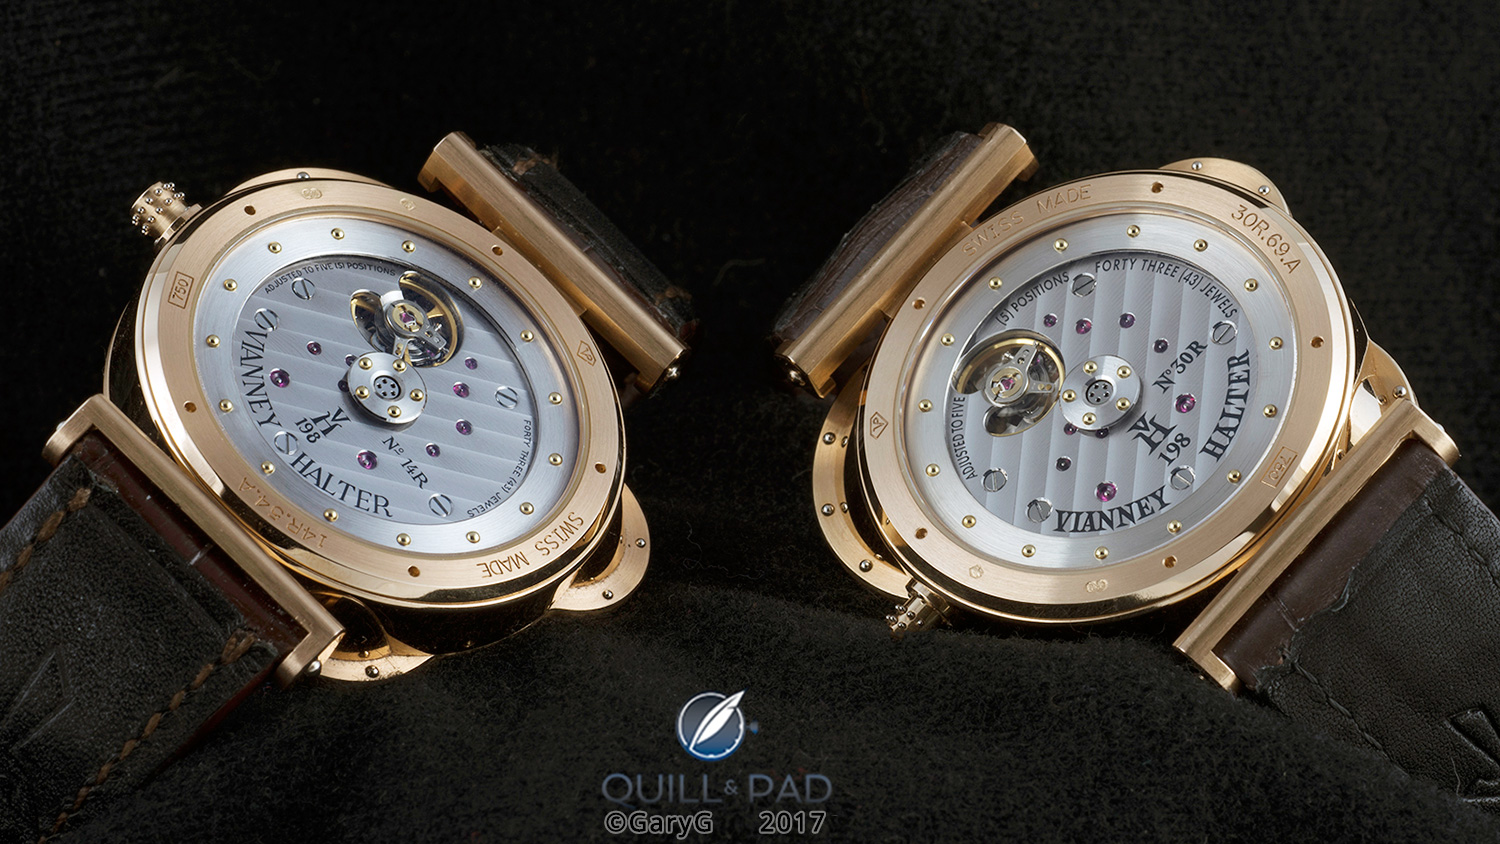 Two Vianney Halter Antiquas of different vintages